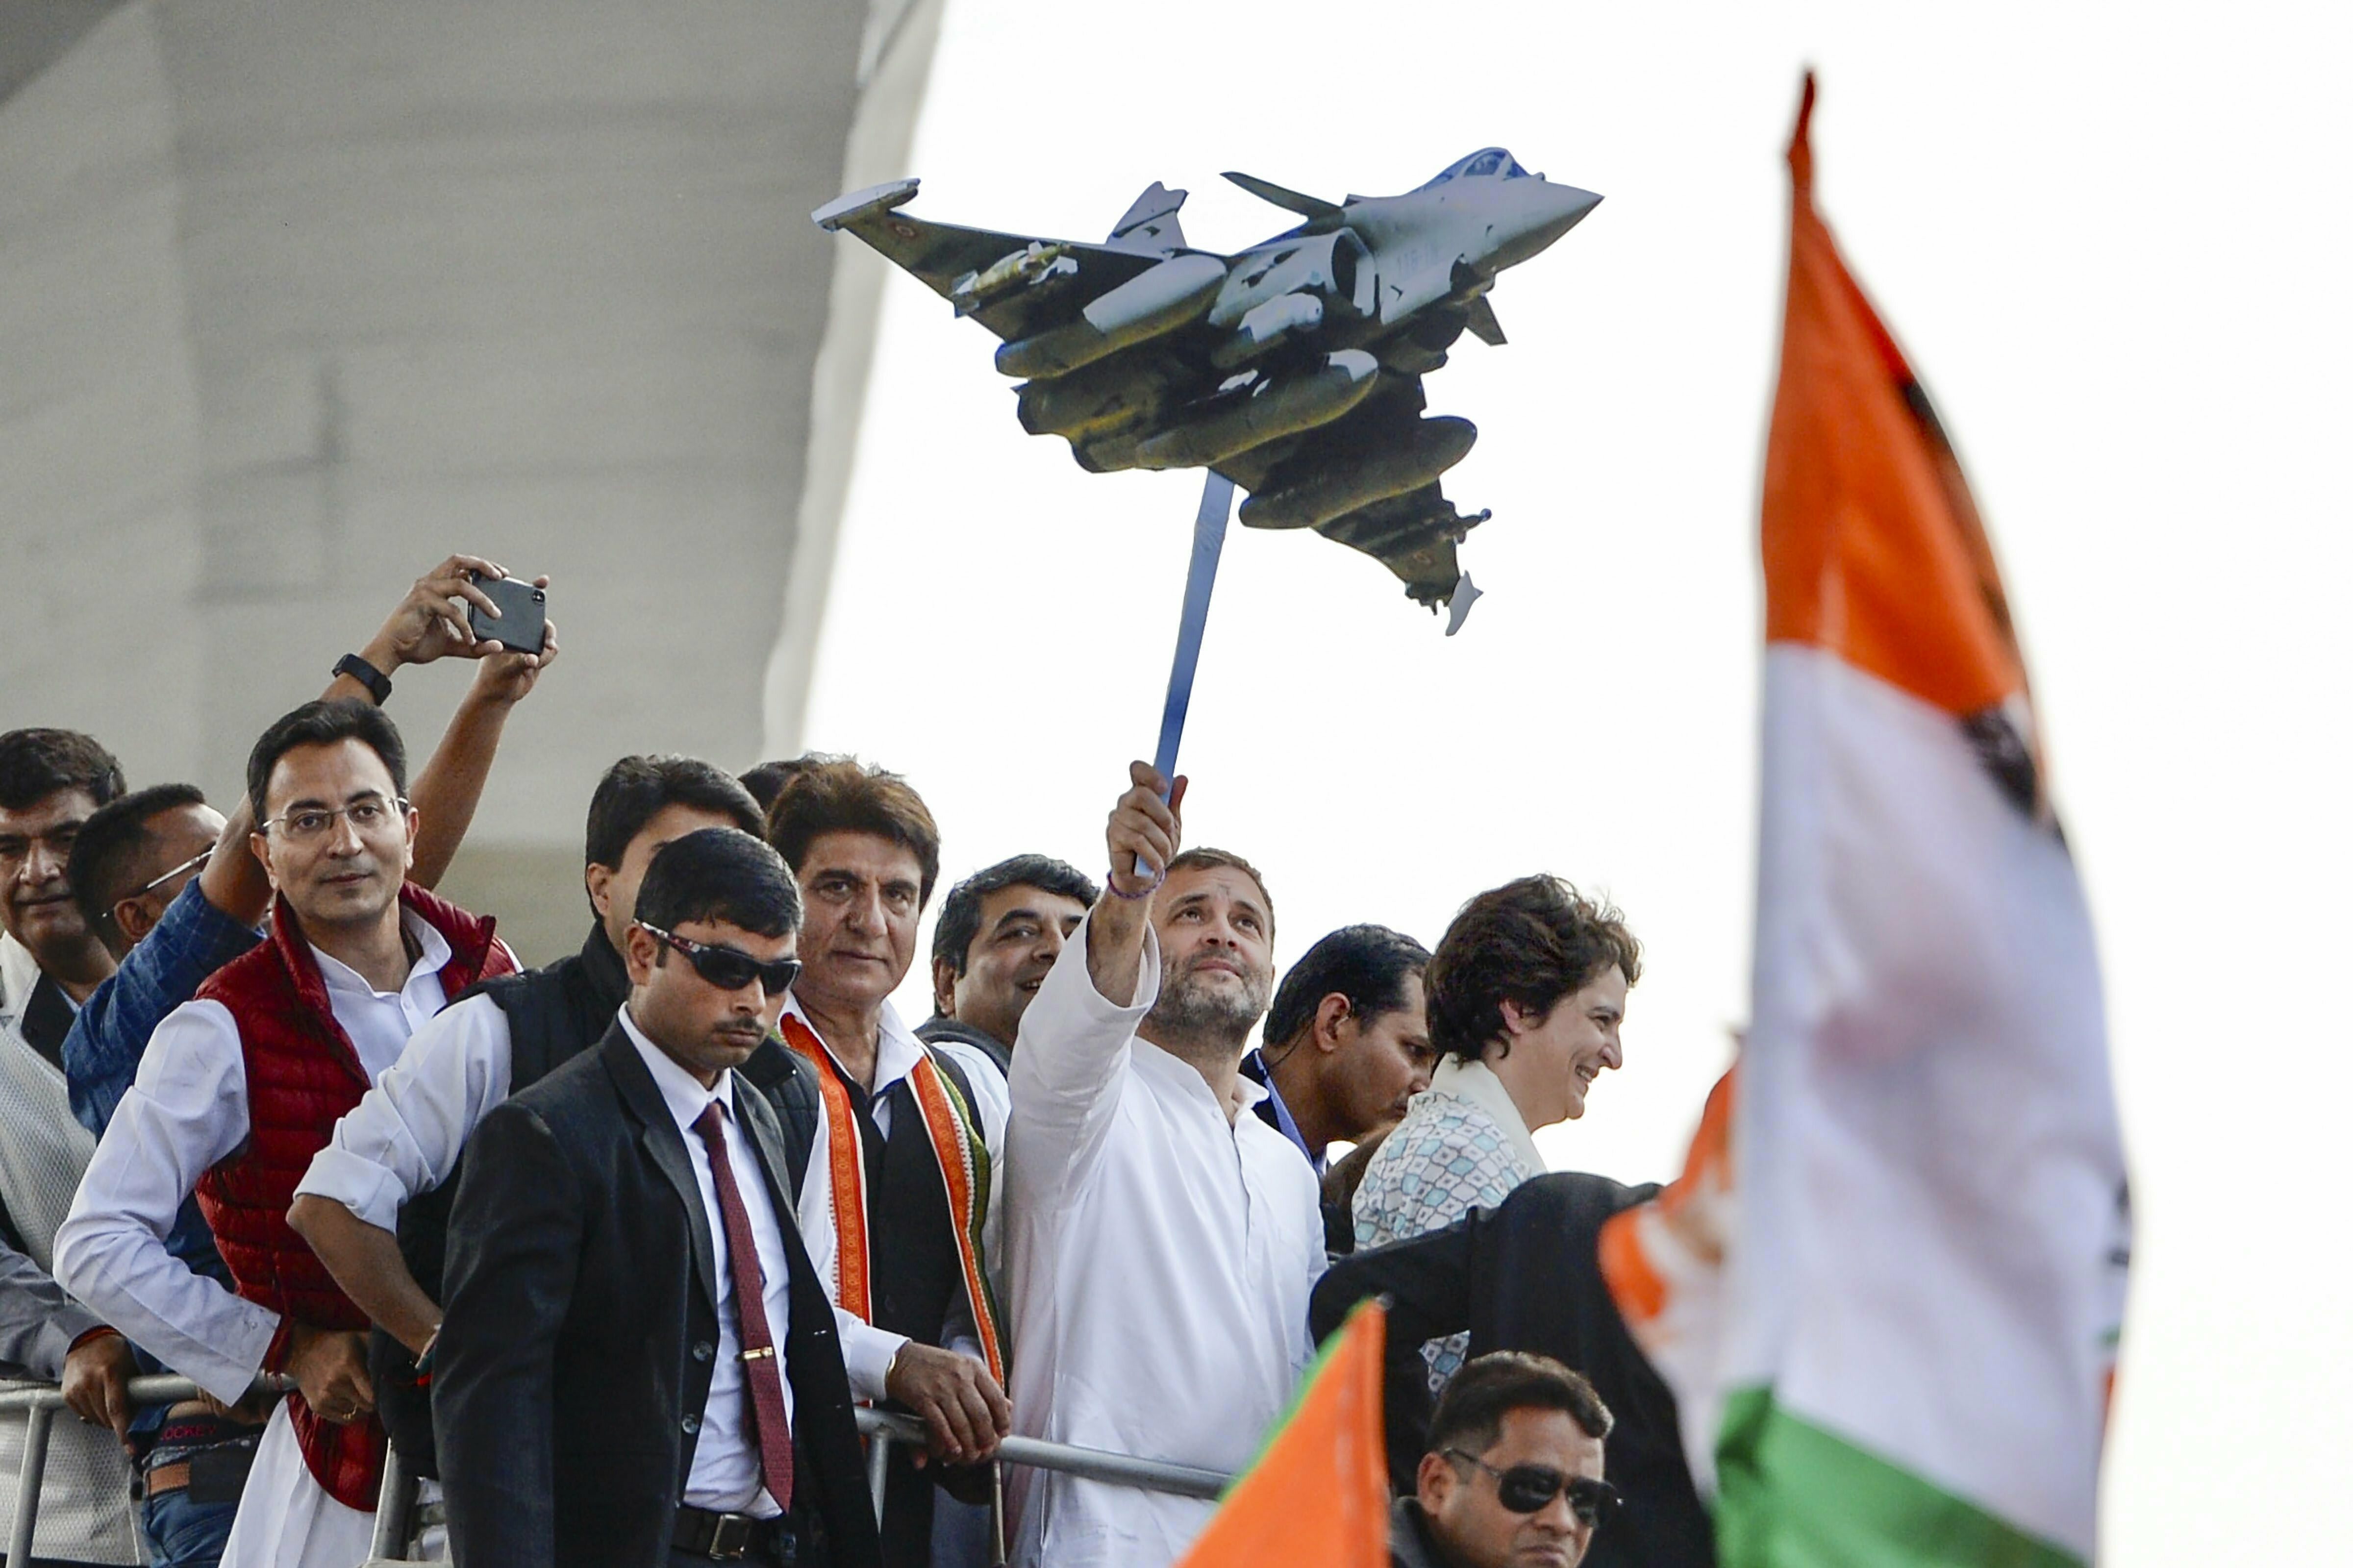 Congress President Rahul Gandhi holds a model of Rafale aircraft during a roadshow along with the party general secretaries Priyanka Gandhi Vadra and Jyotiraditya Scindia, in Lucknow - PTI